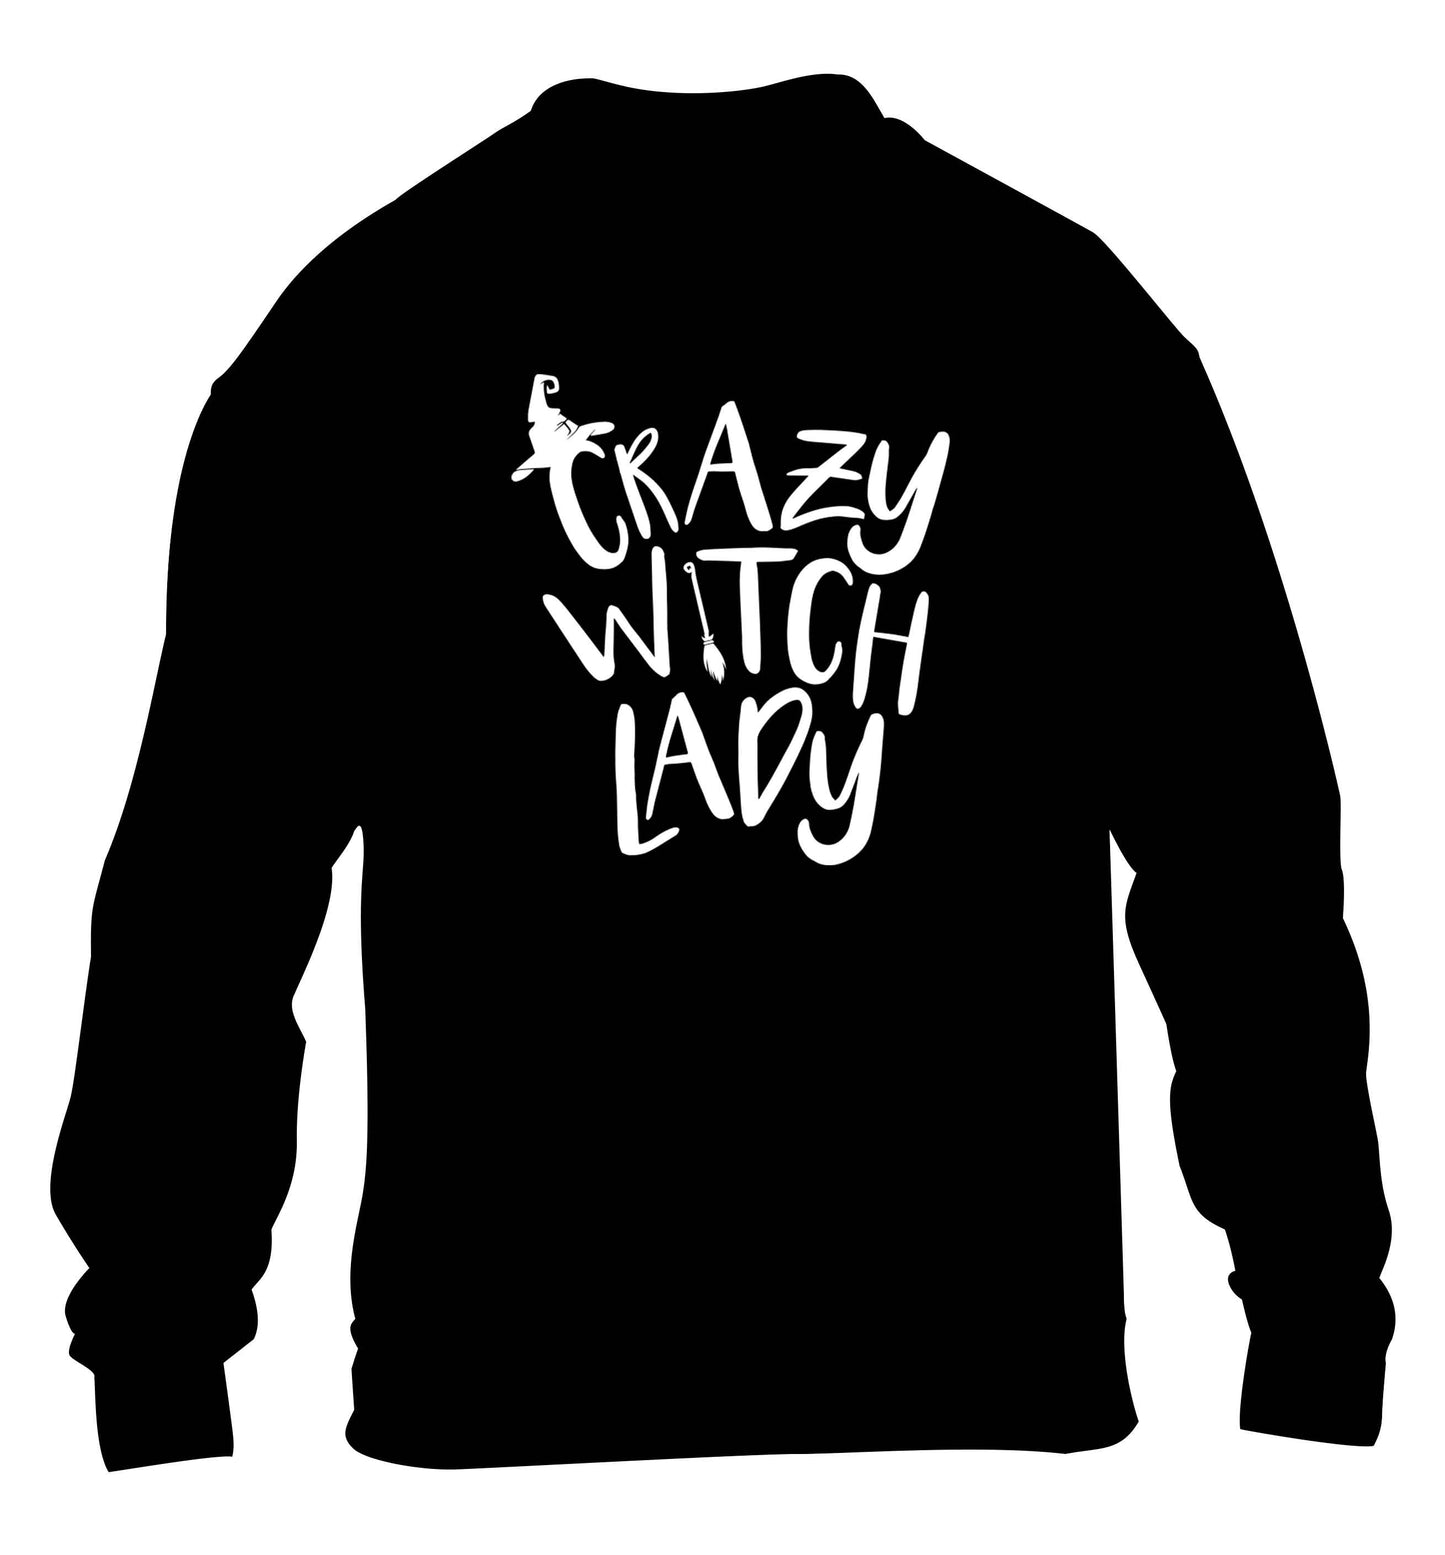 Crazy witch lady children's black sweater 12-13 Years